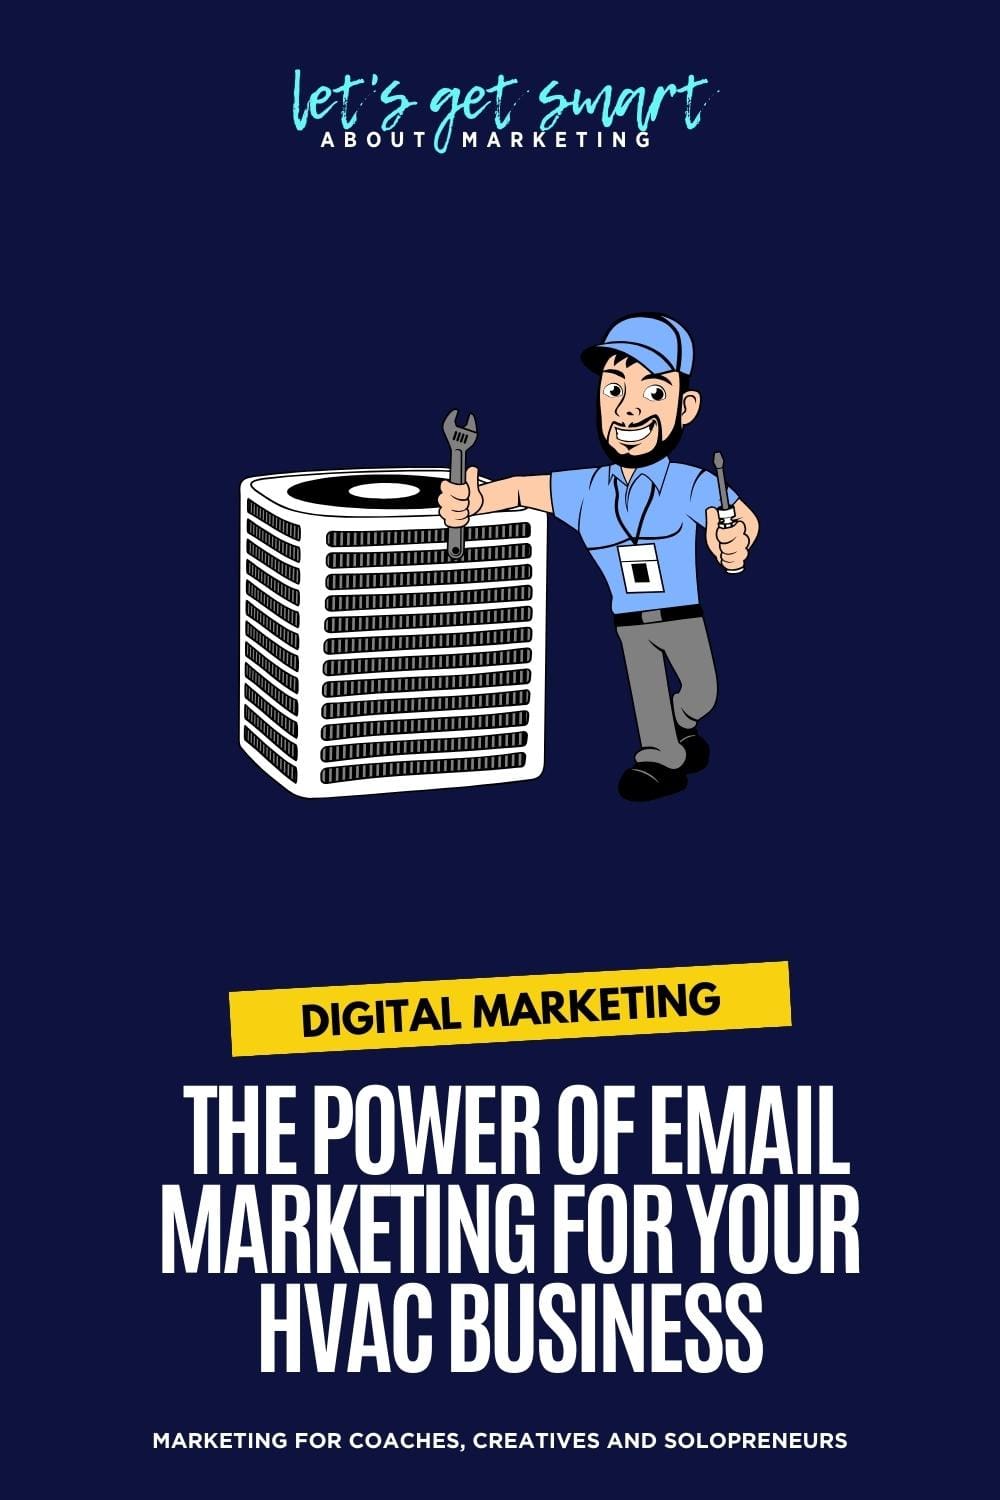 Harnessing The Power Of Email Marketing For Your HVAC Business